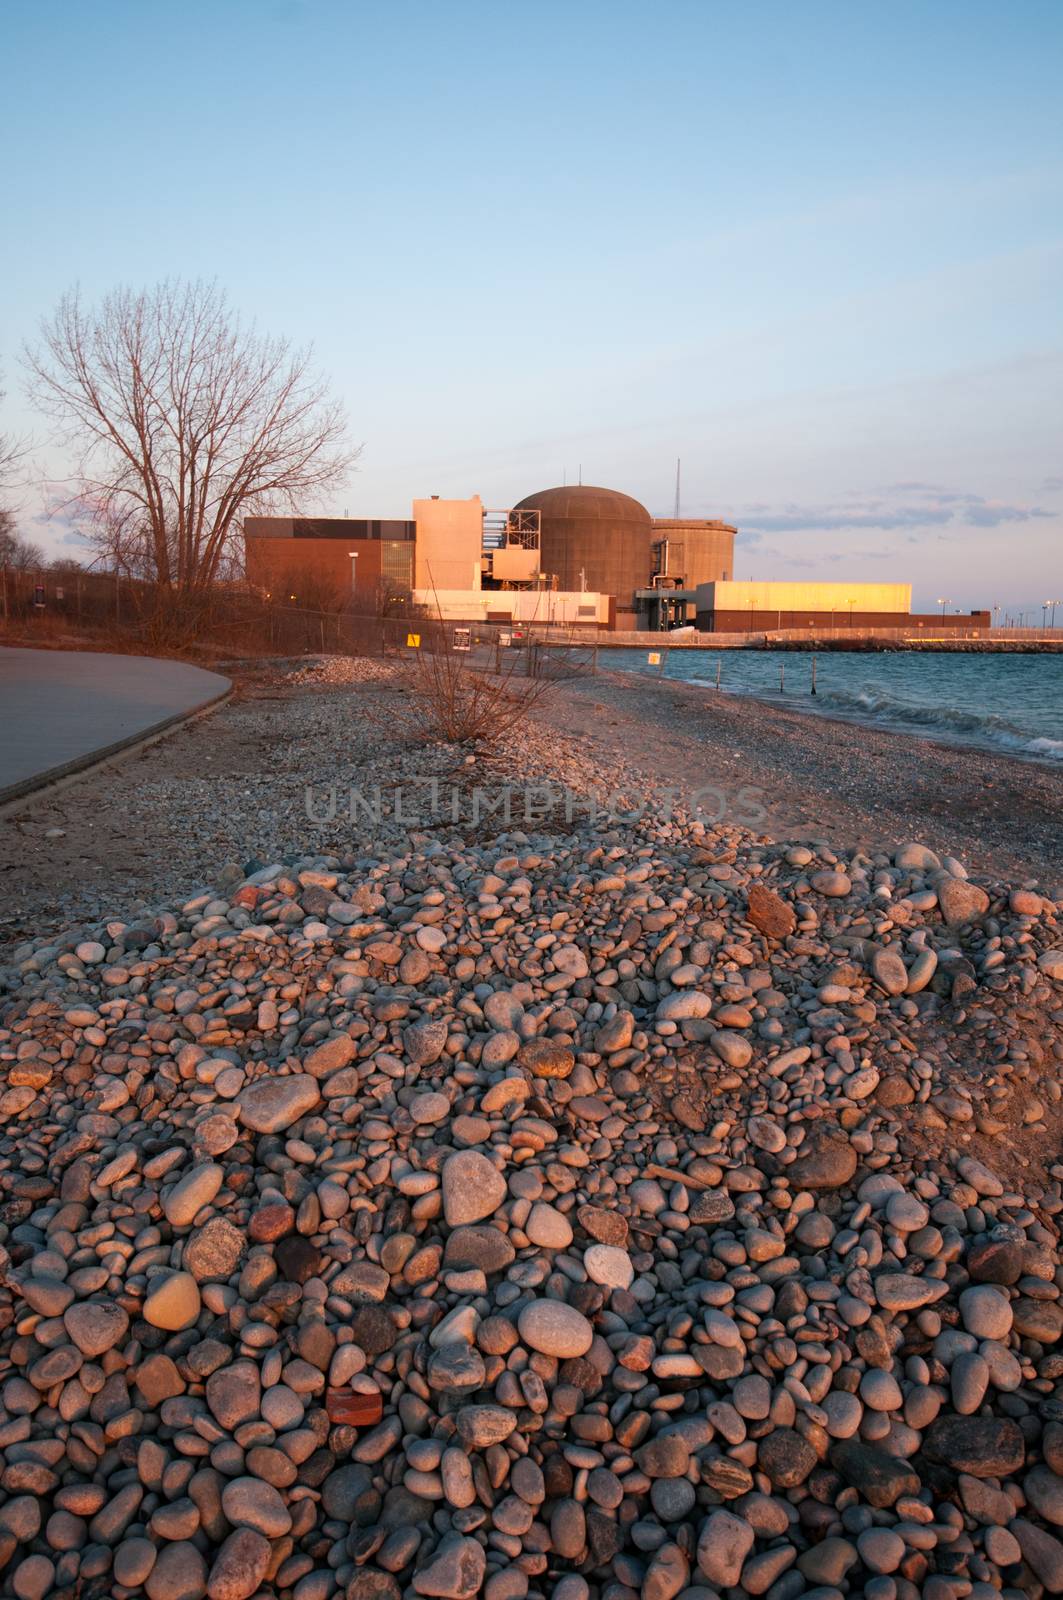 A view of a nuclear power plant in Pickering, Lake Ontario, Canada